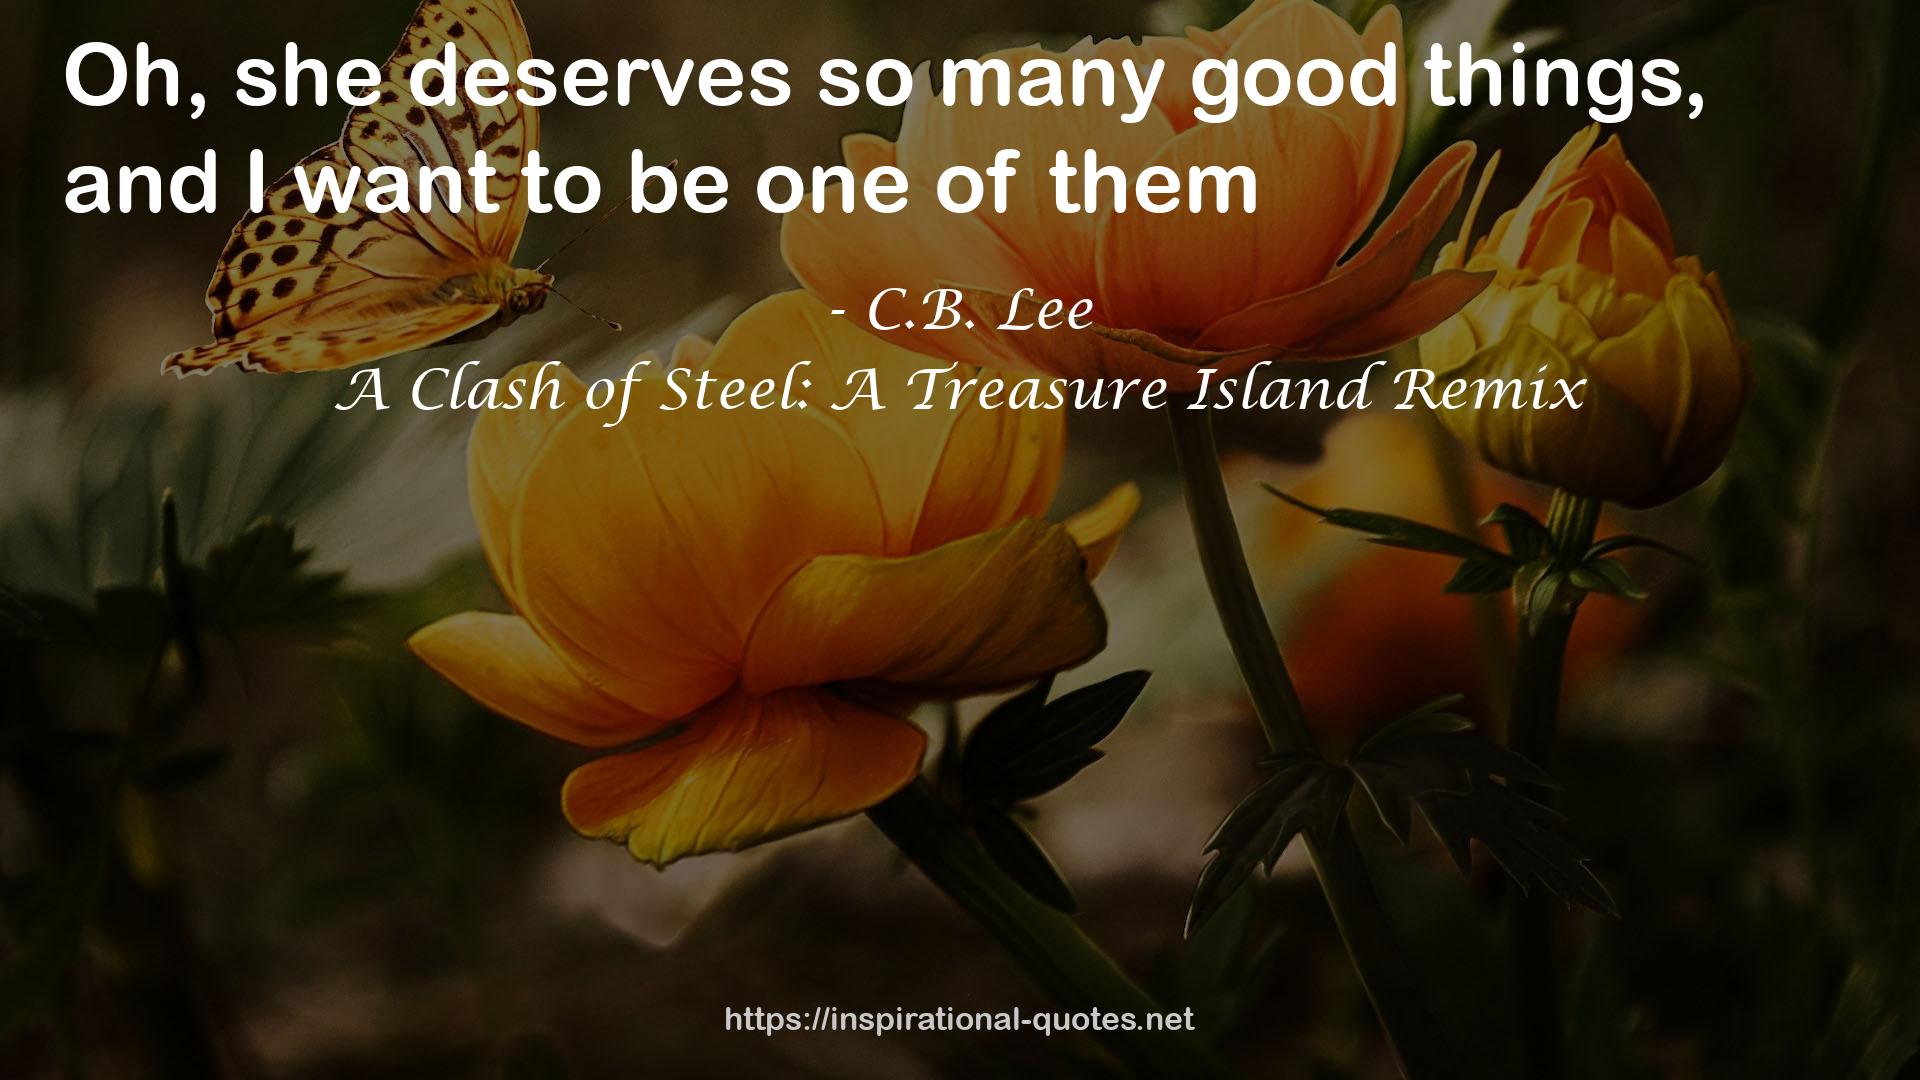 A Clash of Steel: A Treasure Island Remix QUOTES